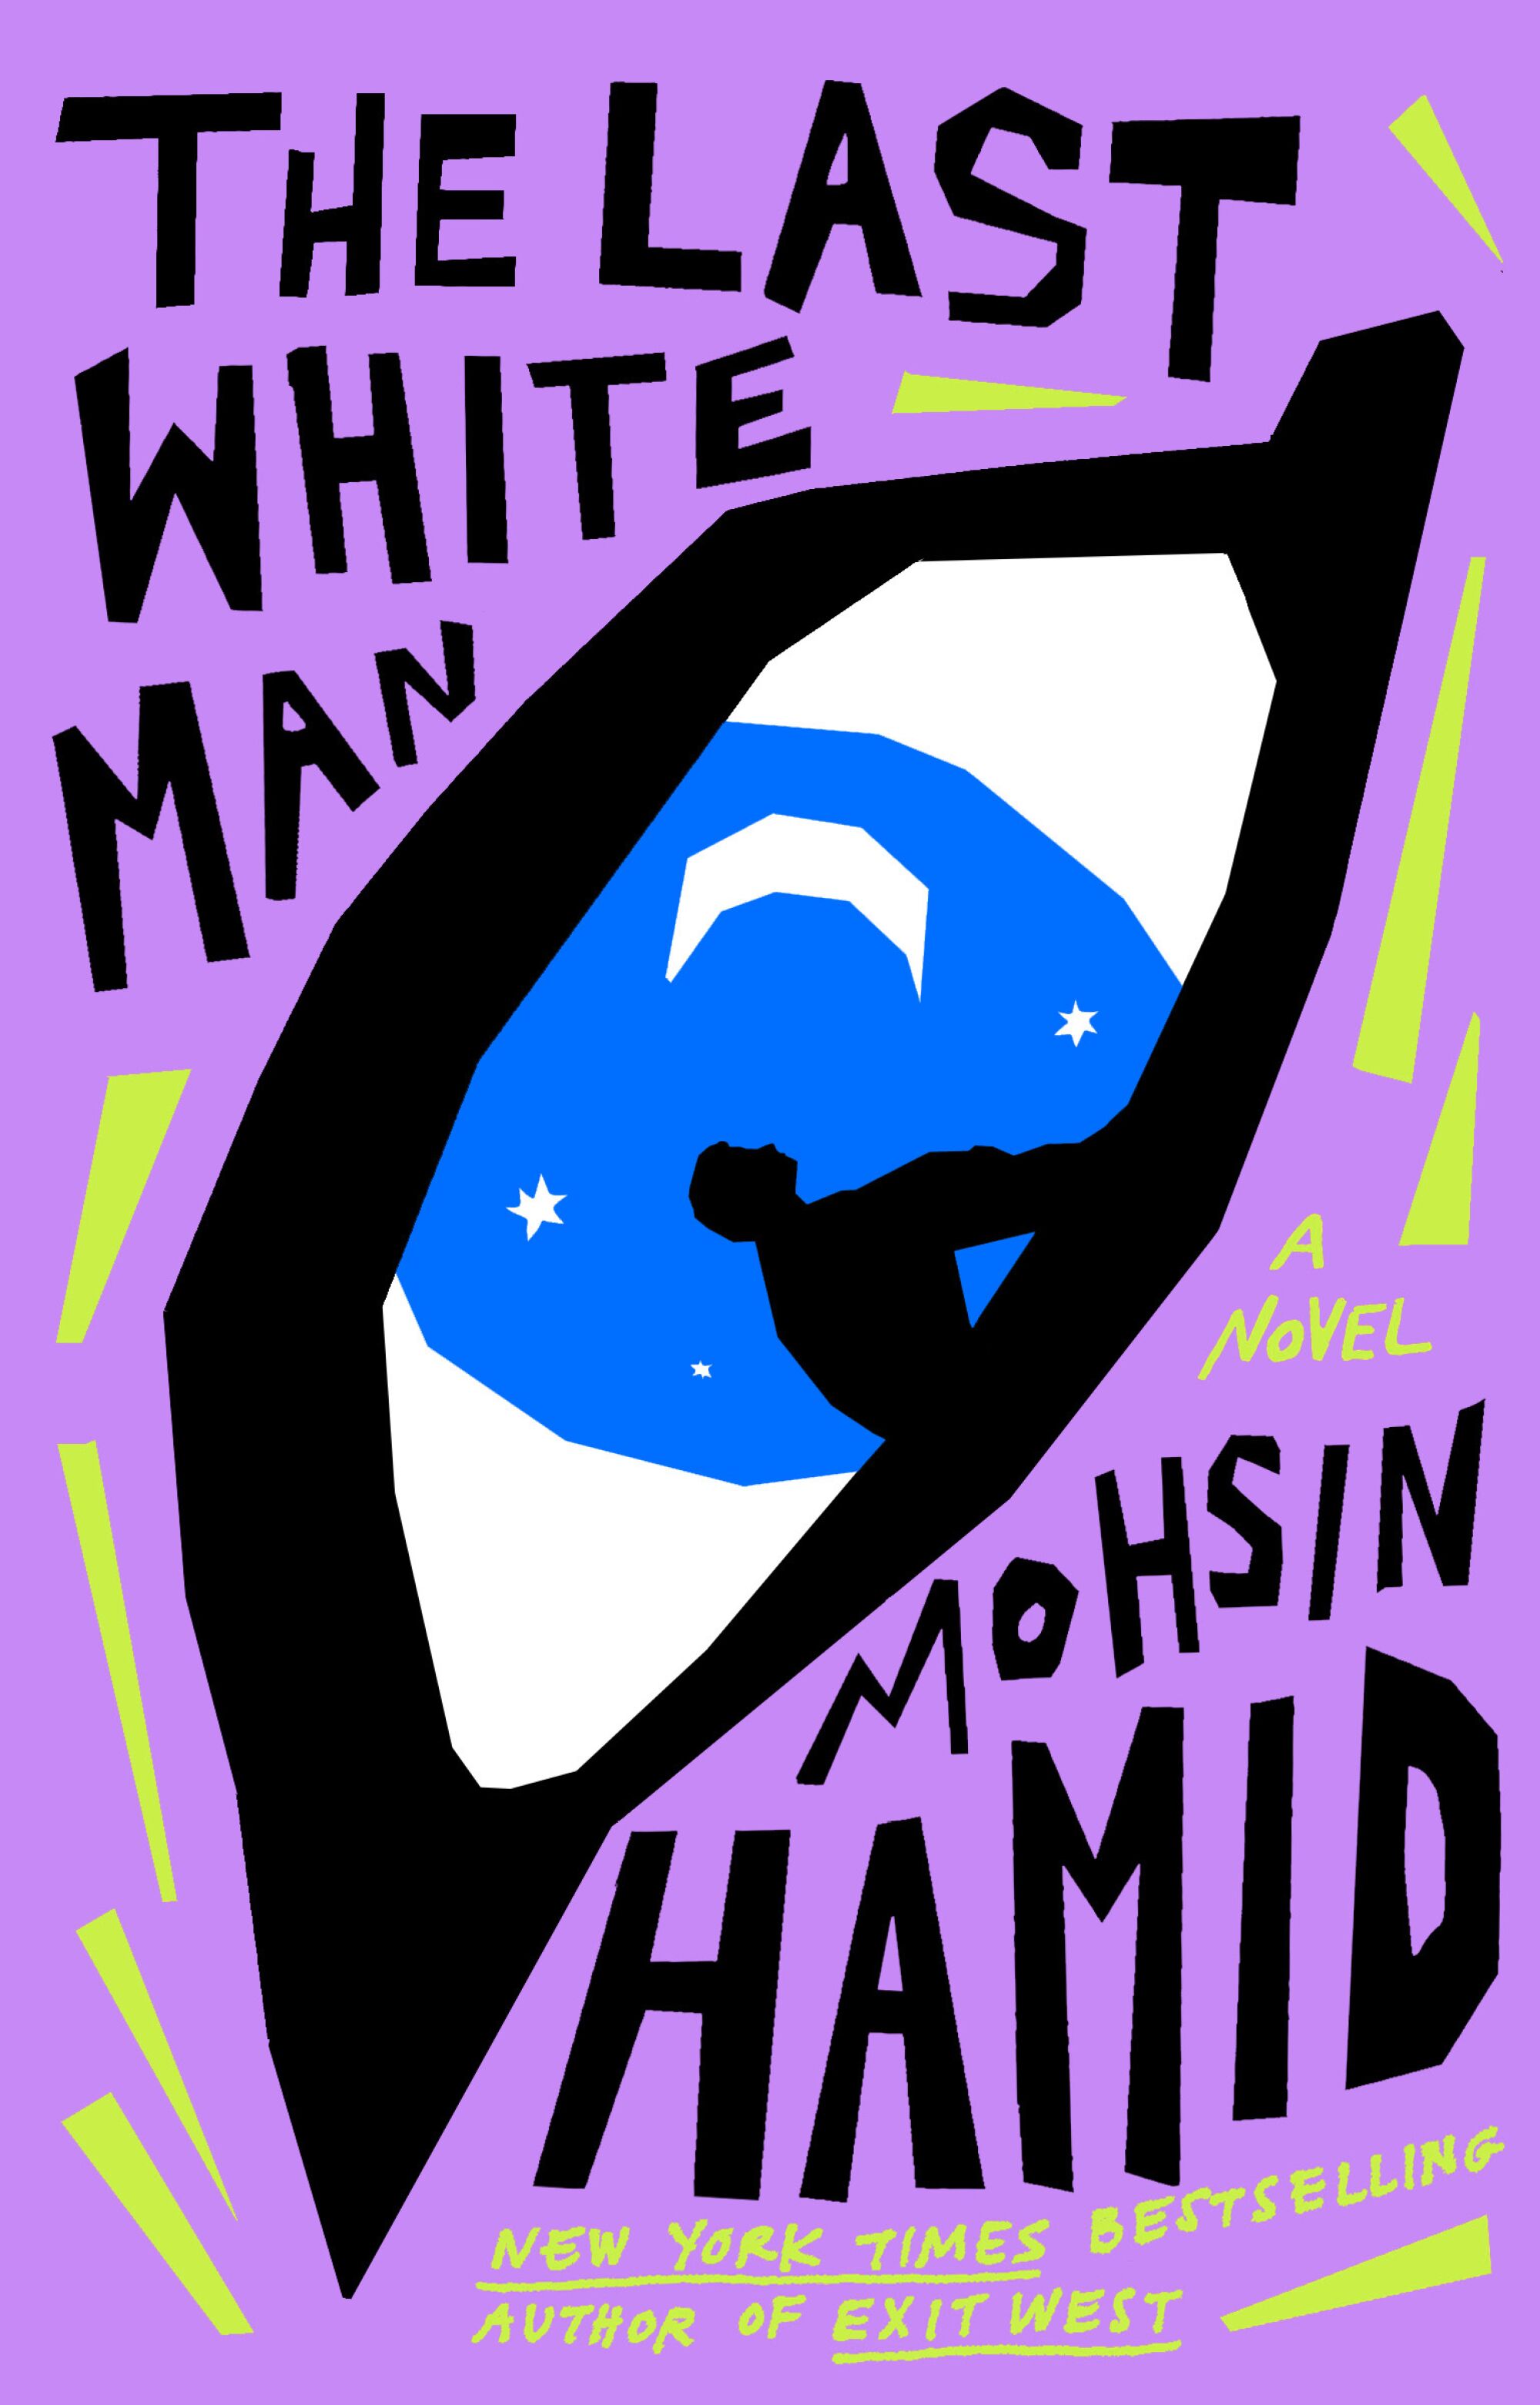 illustration of an eye on purple background on cover of "The Last White Man" by Mohsin Hamid